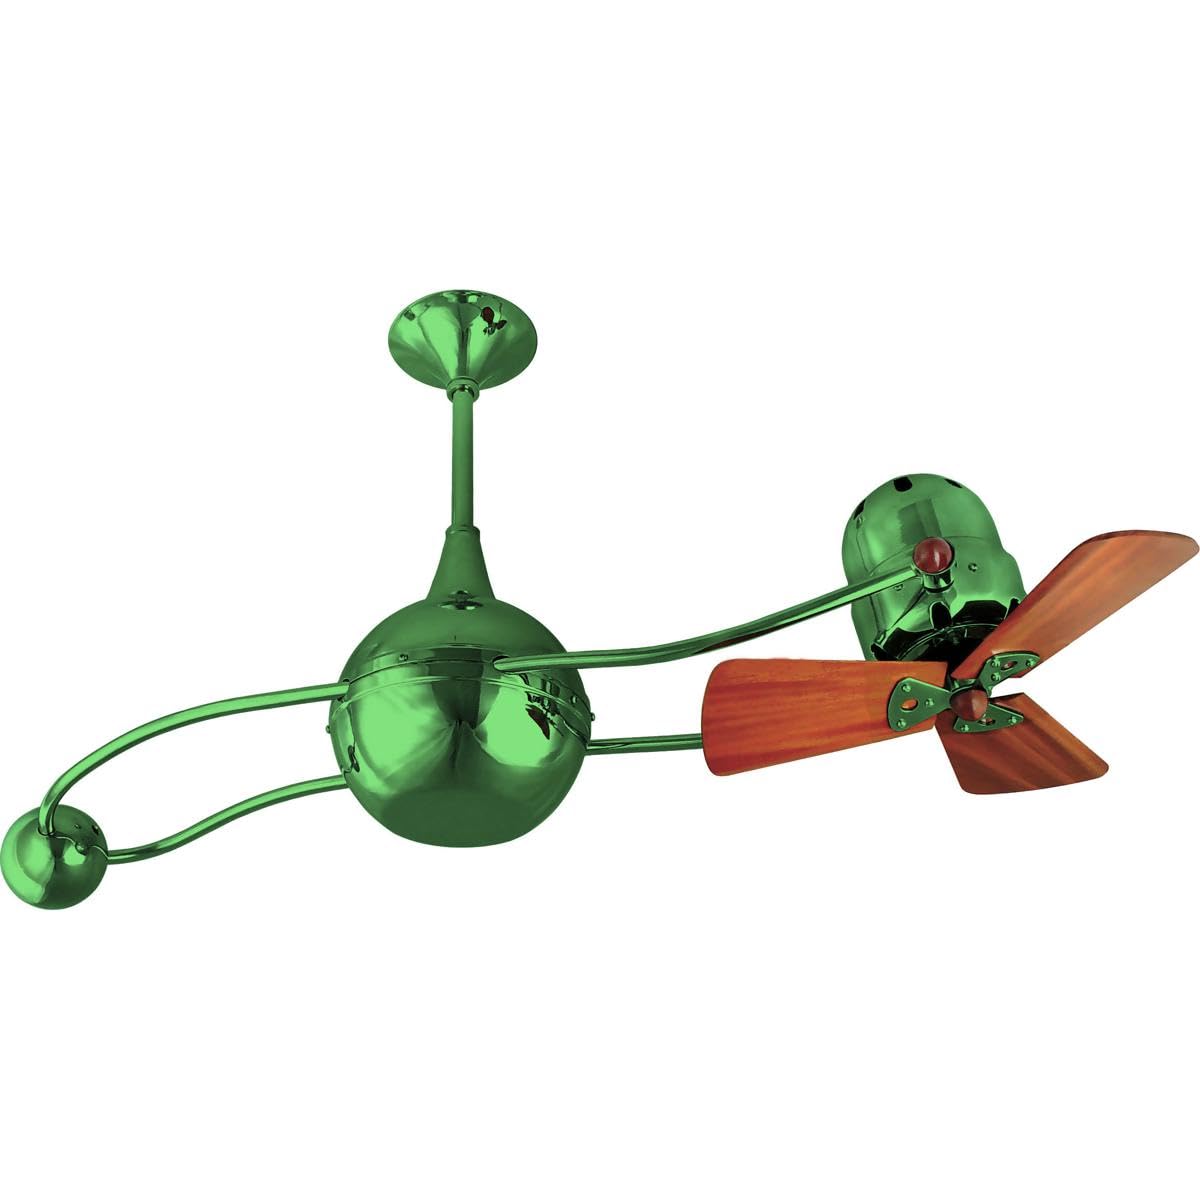 Matthews Fan B2K-GREEN-WD Brisa 360° counterweight rotational ceiling fan in Esmerelda (Green) finish with solid sustainable mahogany wood blades.